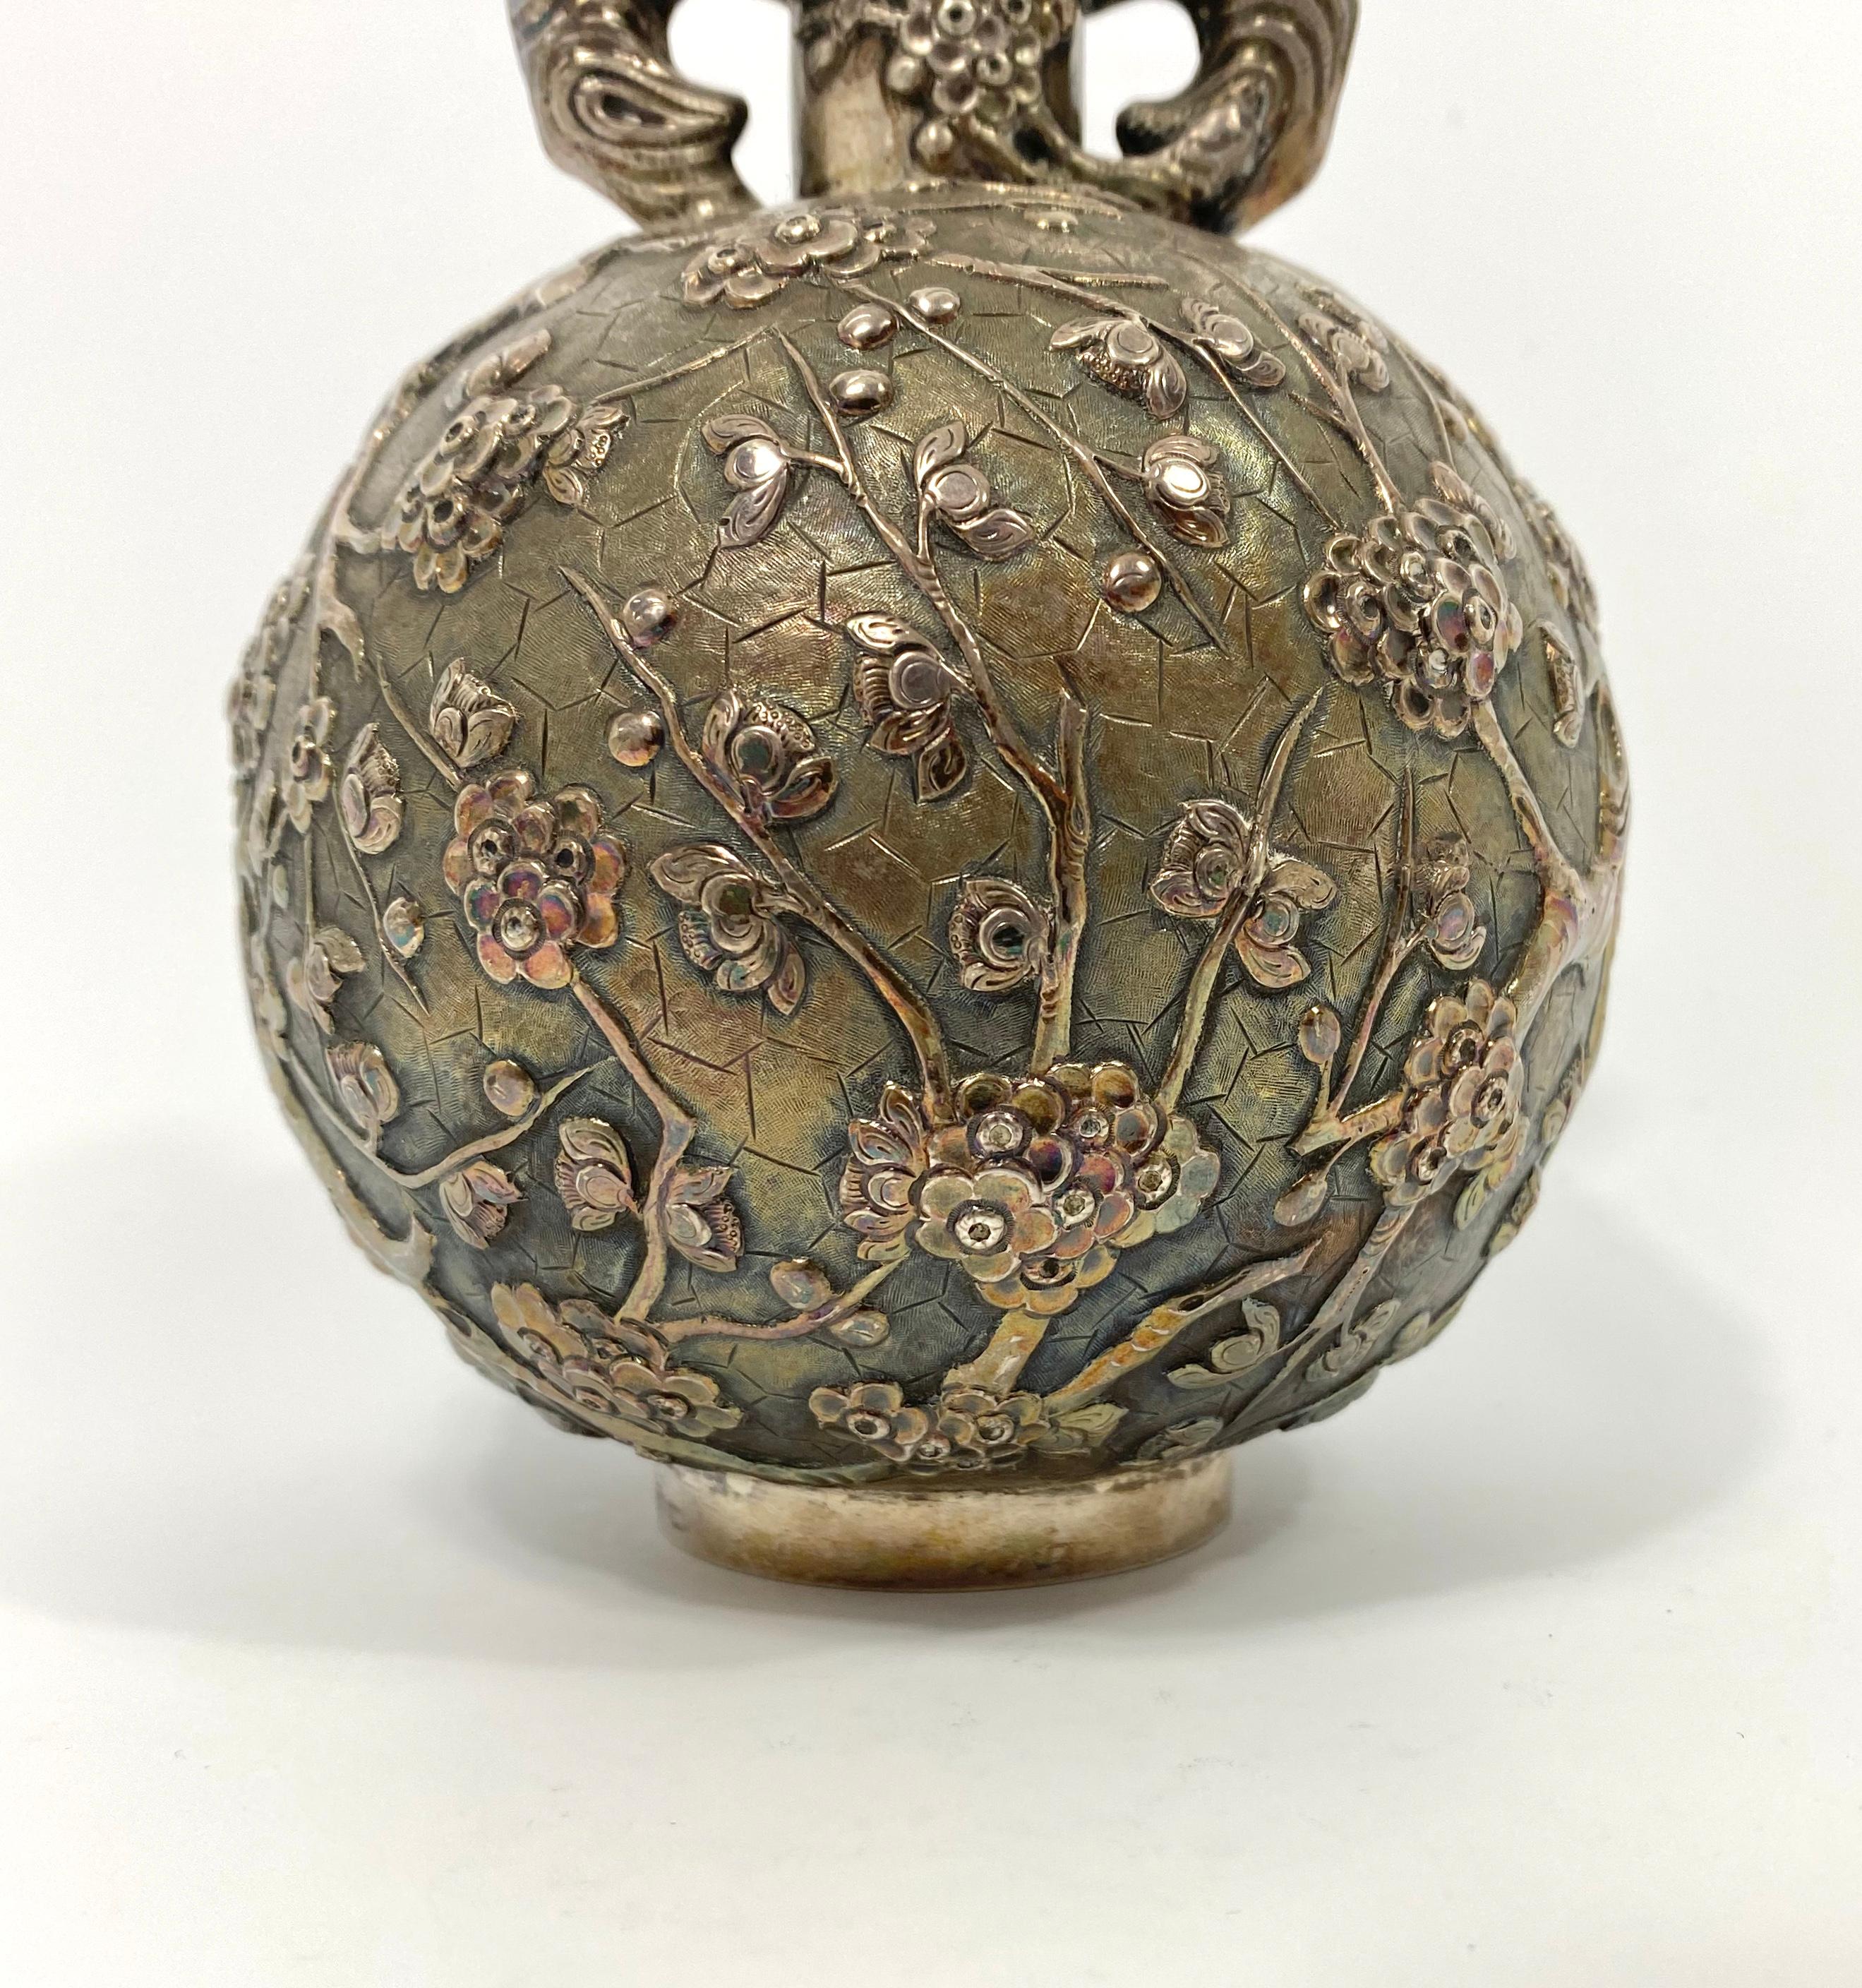 Chinese silver globular flask, Luen Wo, Shanghai, circa 1900. The heavy gauge silver flask, being cast and chased with flowering cherry blossom. The twin handles formed as large branches of the prunus tree, at the neck of the flask, all upon an